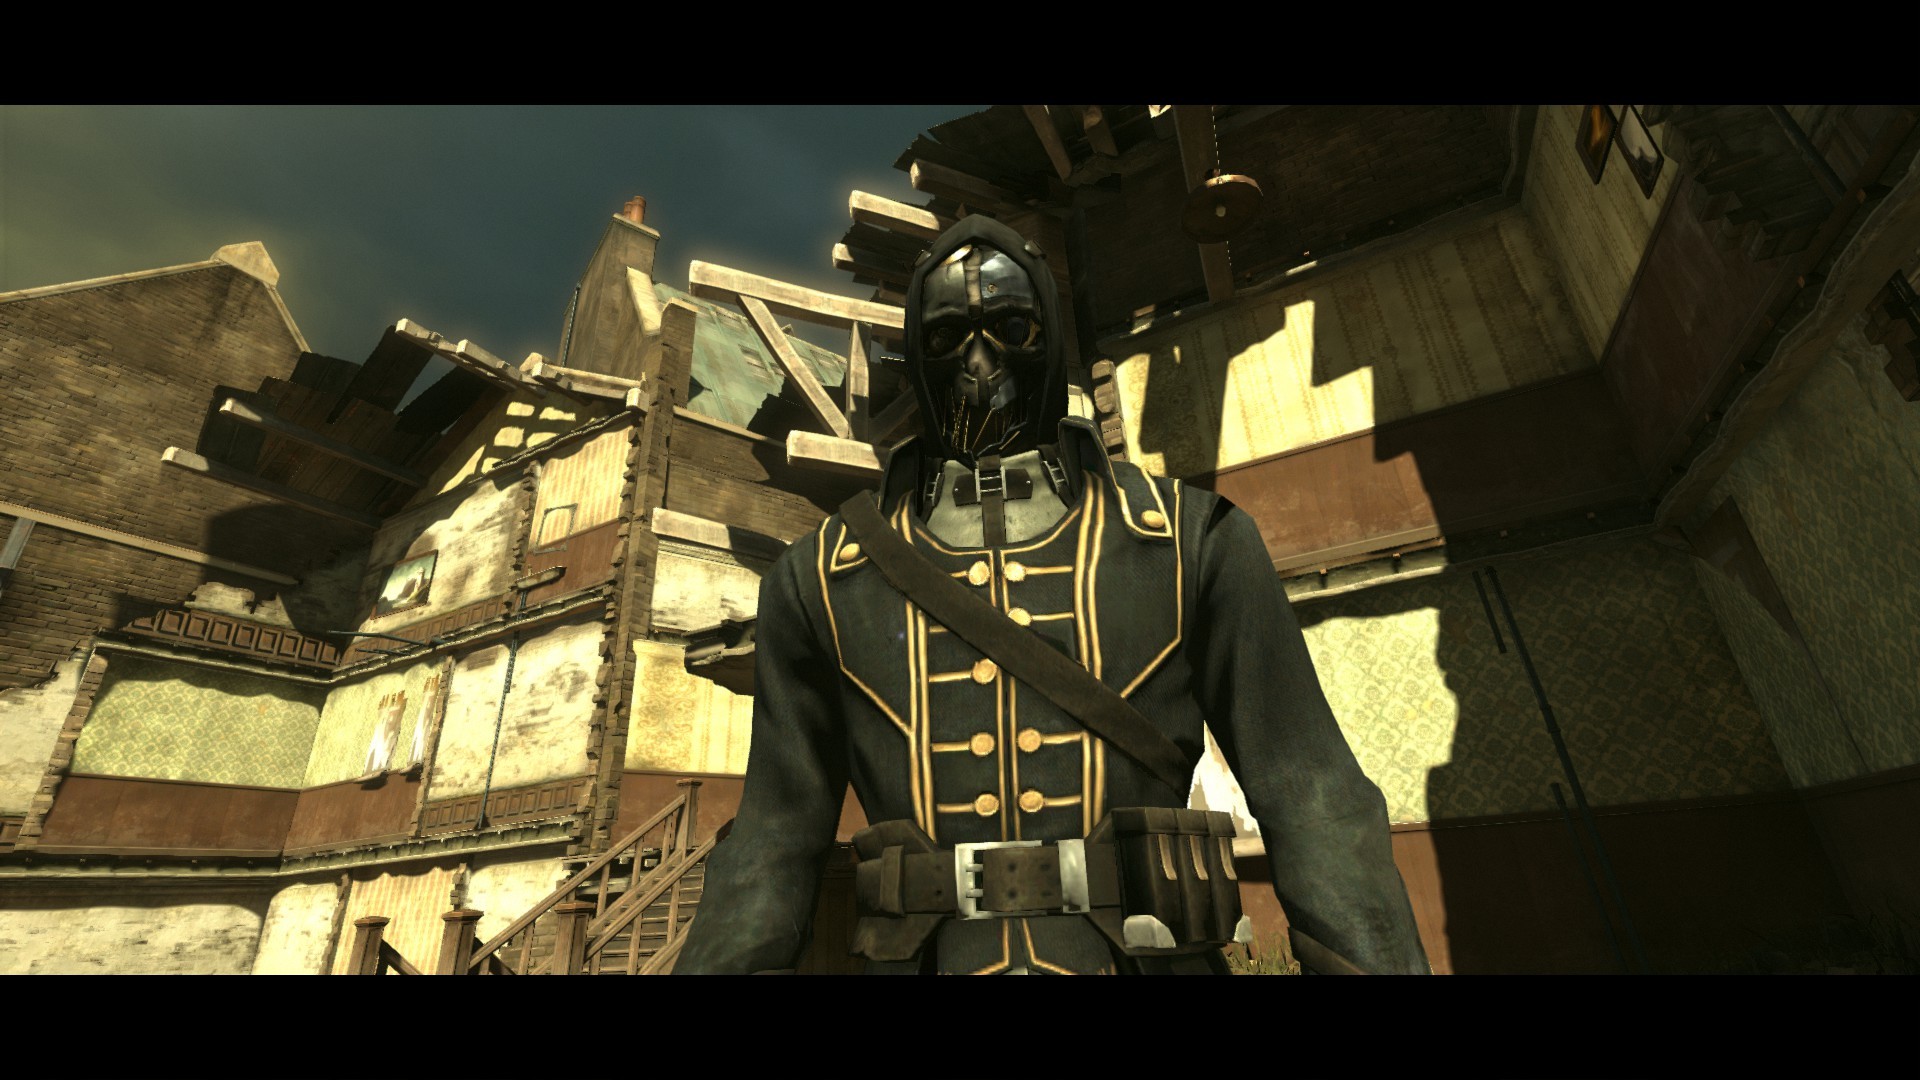 General 1920x1080 Dishonored Corvo Attano Bethesda Softworks mask video game characters CGI standing Arkane Studios video games sunlight looking at viewer stairs video game art screen shot video game men vest